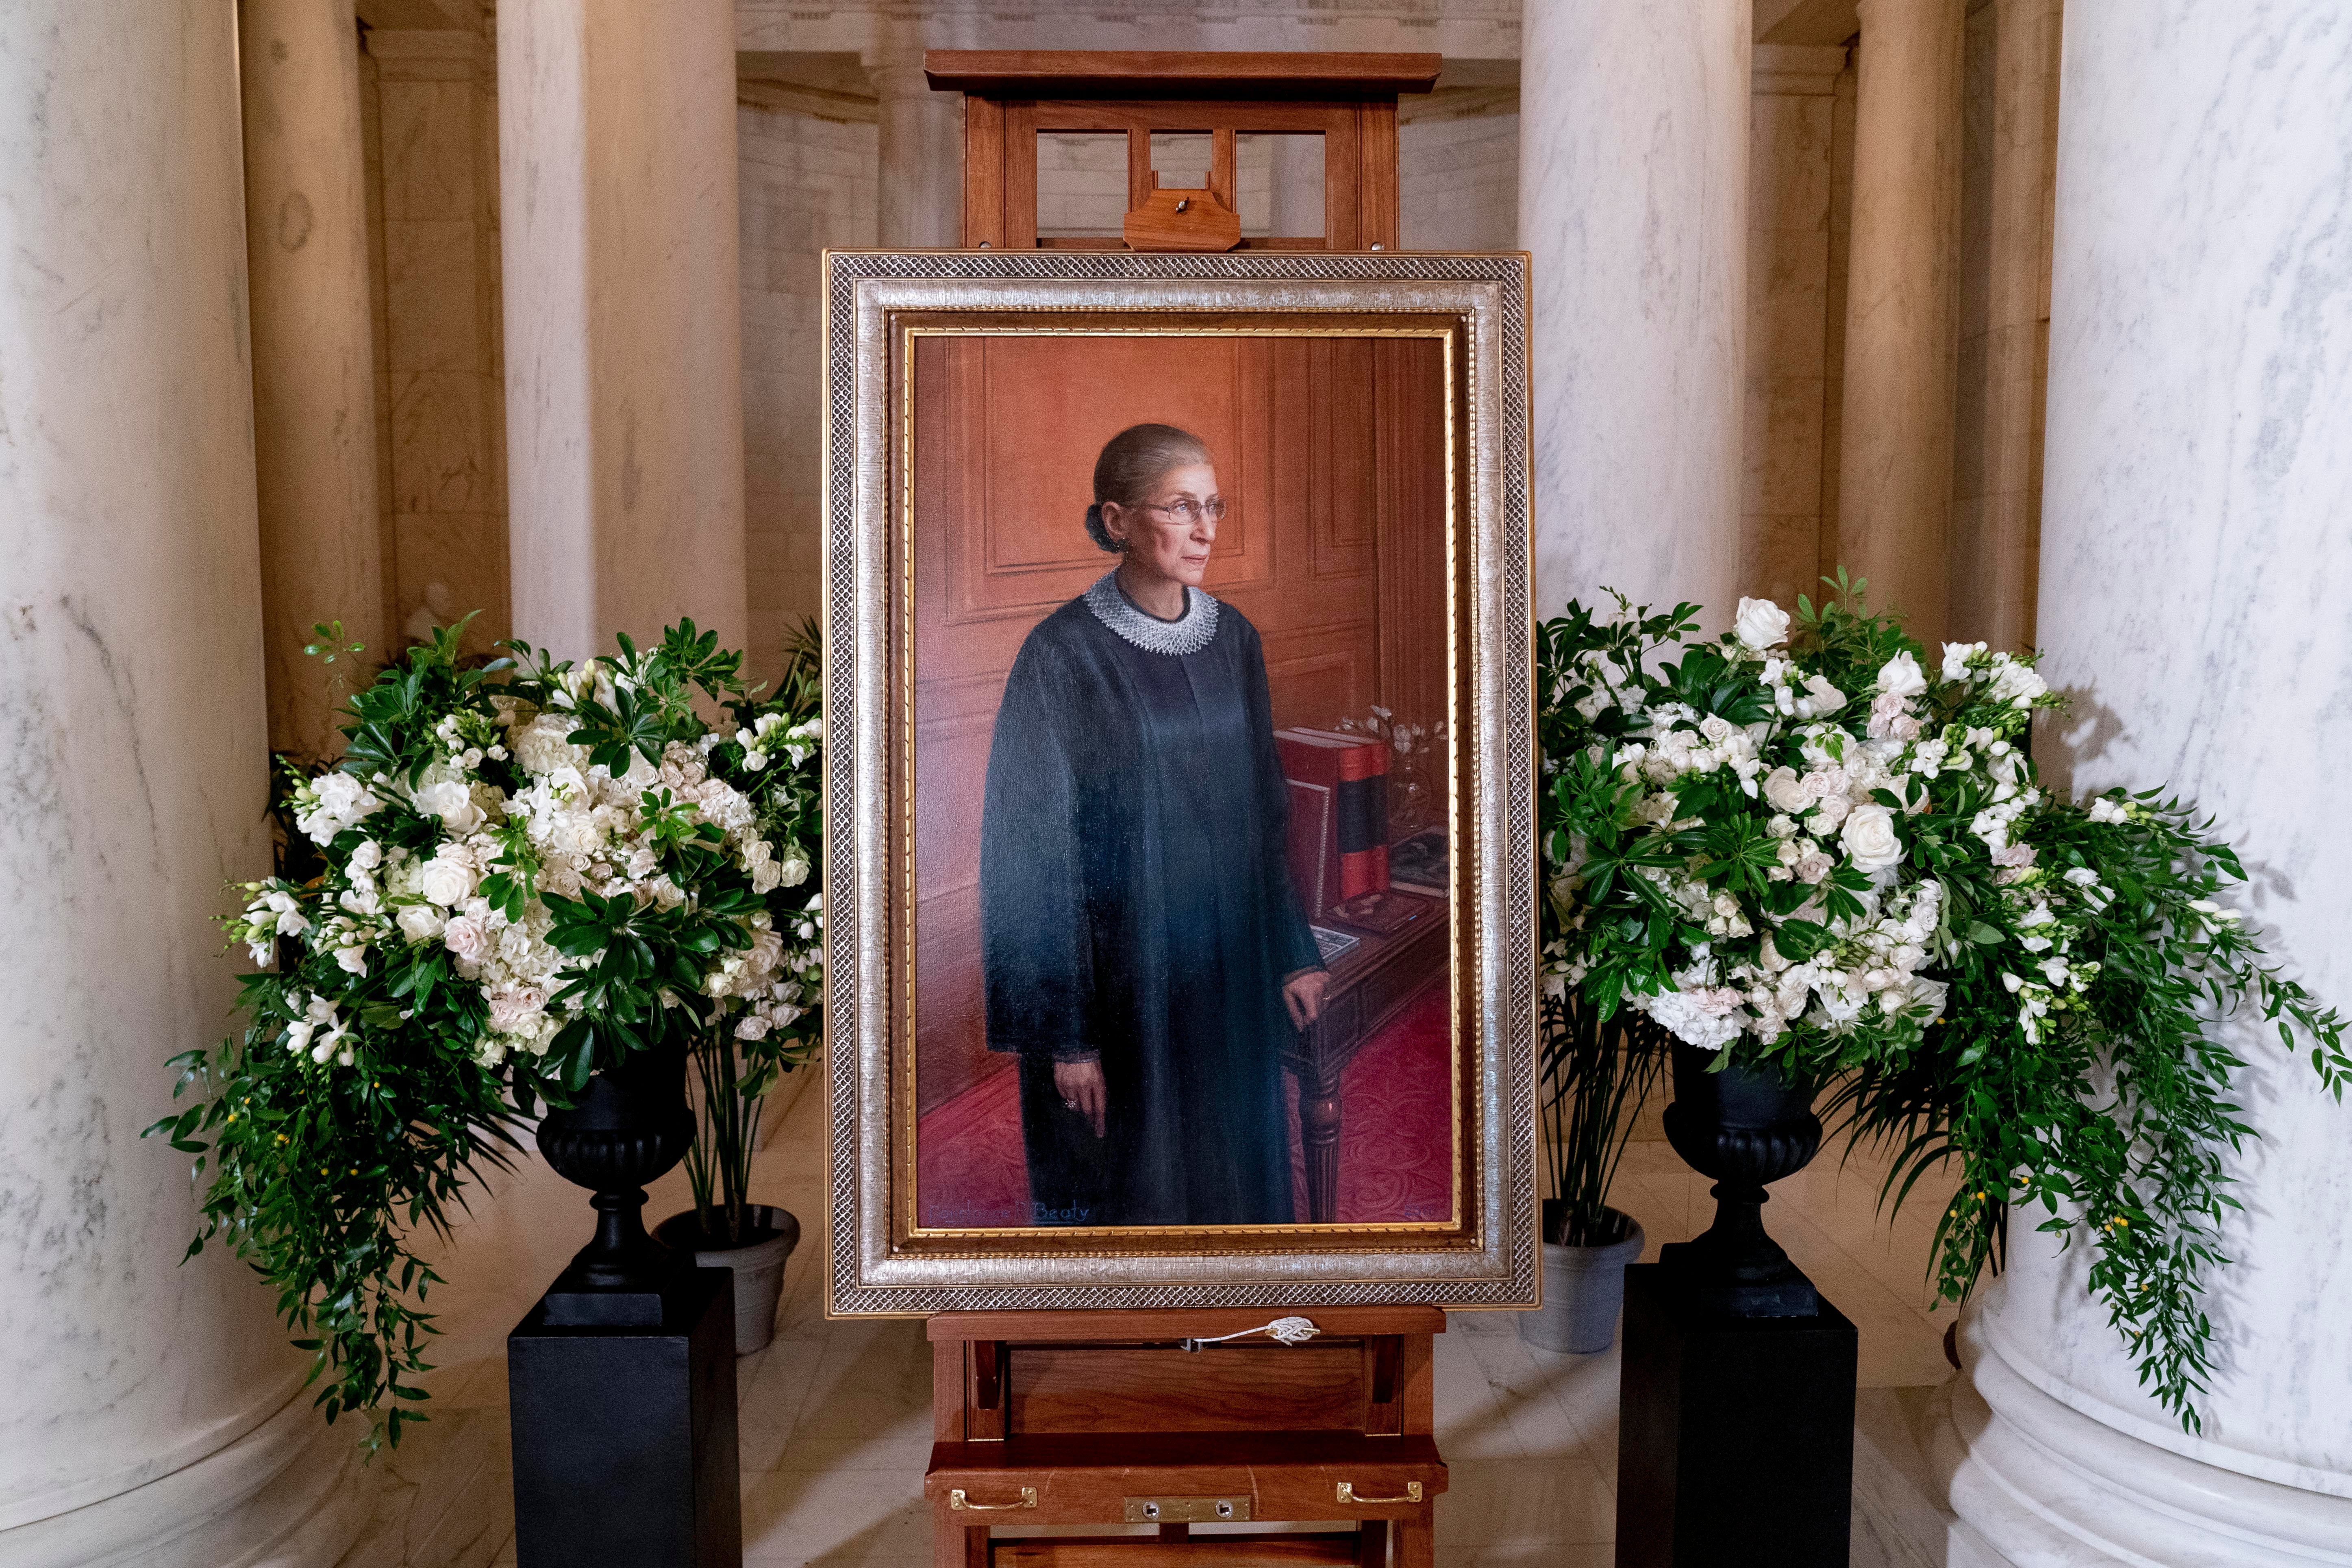 A portrait of Ruth Bader Ginsburg in the Great Hall following a private ceremony for her at the US Supreme Court